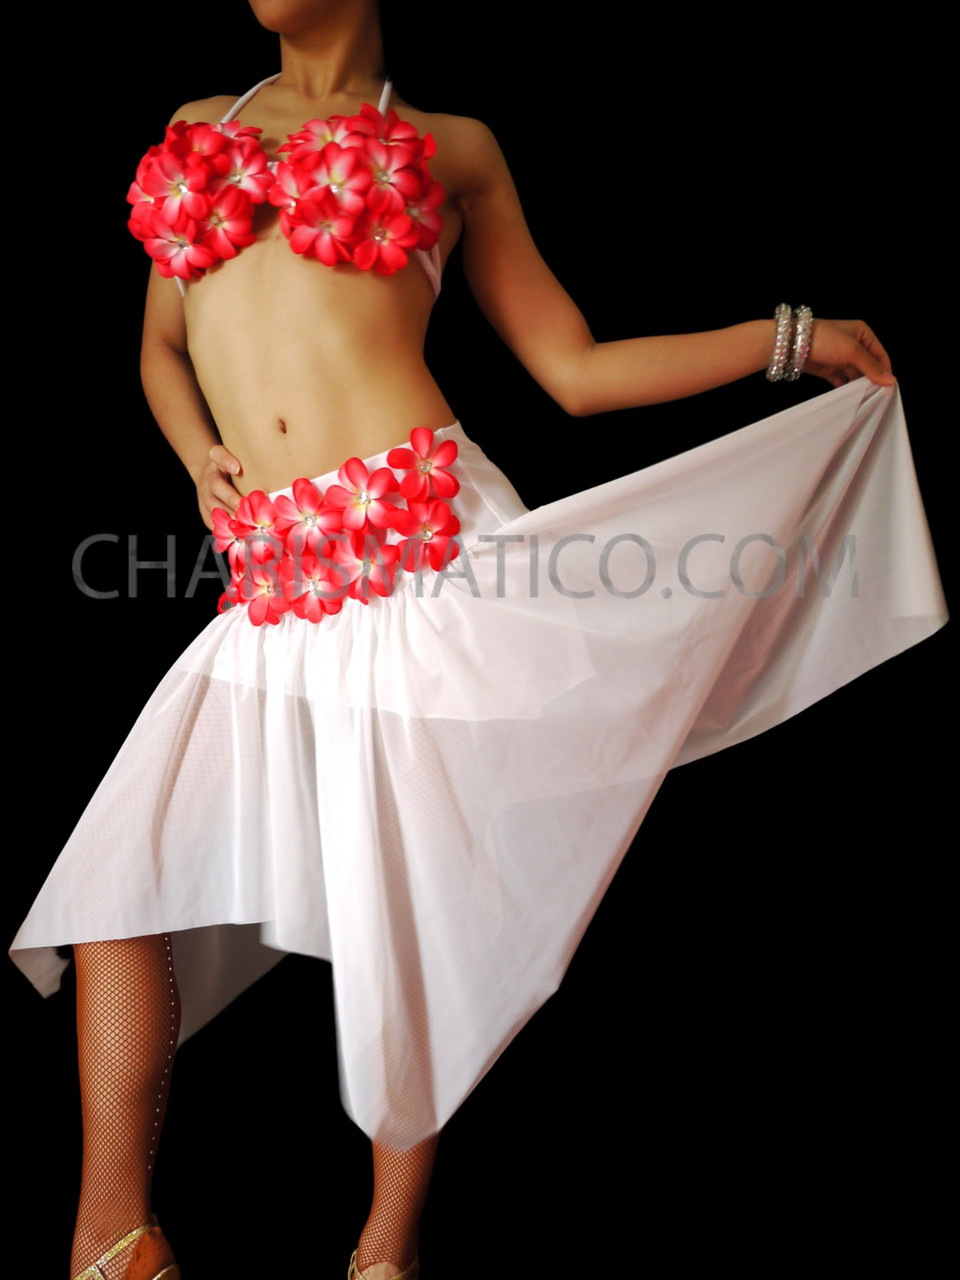 https://cdn11.bigcommerce.com/s-07991/images/stencil/1280x1280/products/683/57432/Hibiscus_Flower_Embellished_Hawaiian_Two-Piece_Dance_Dress_Bra_DS0416_2__09858.1603099101.jpg?c=2